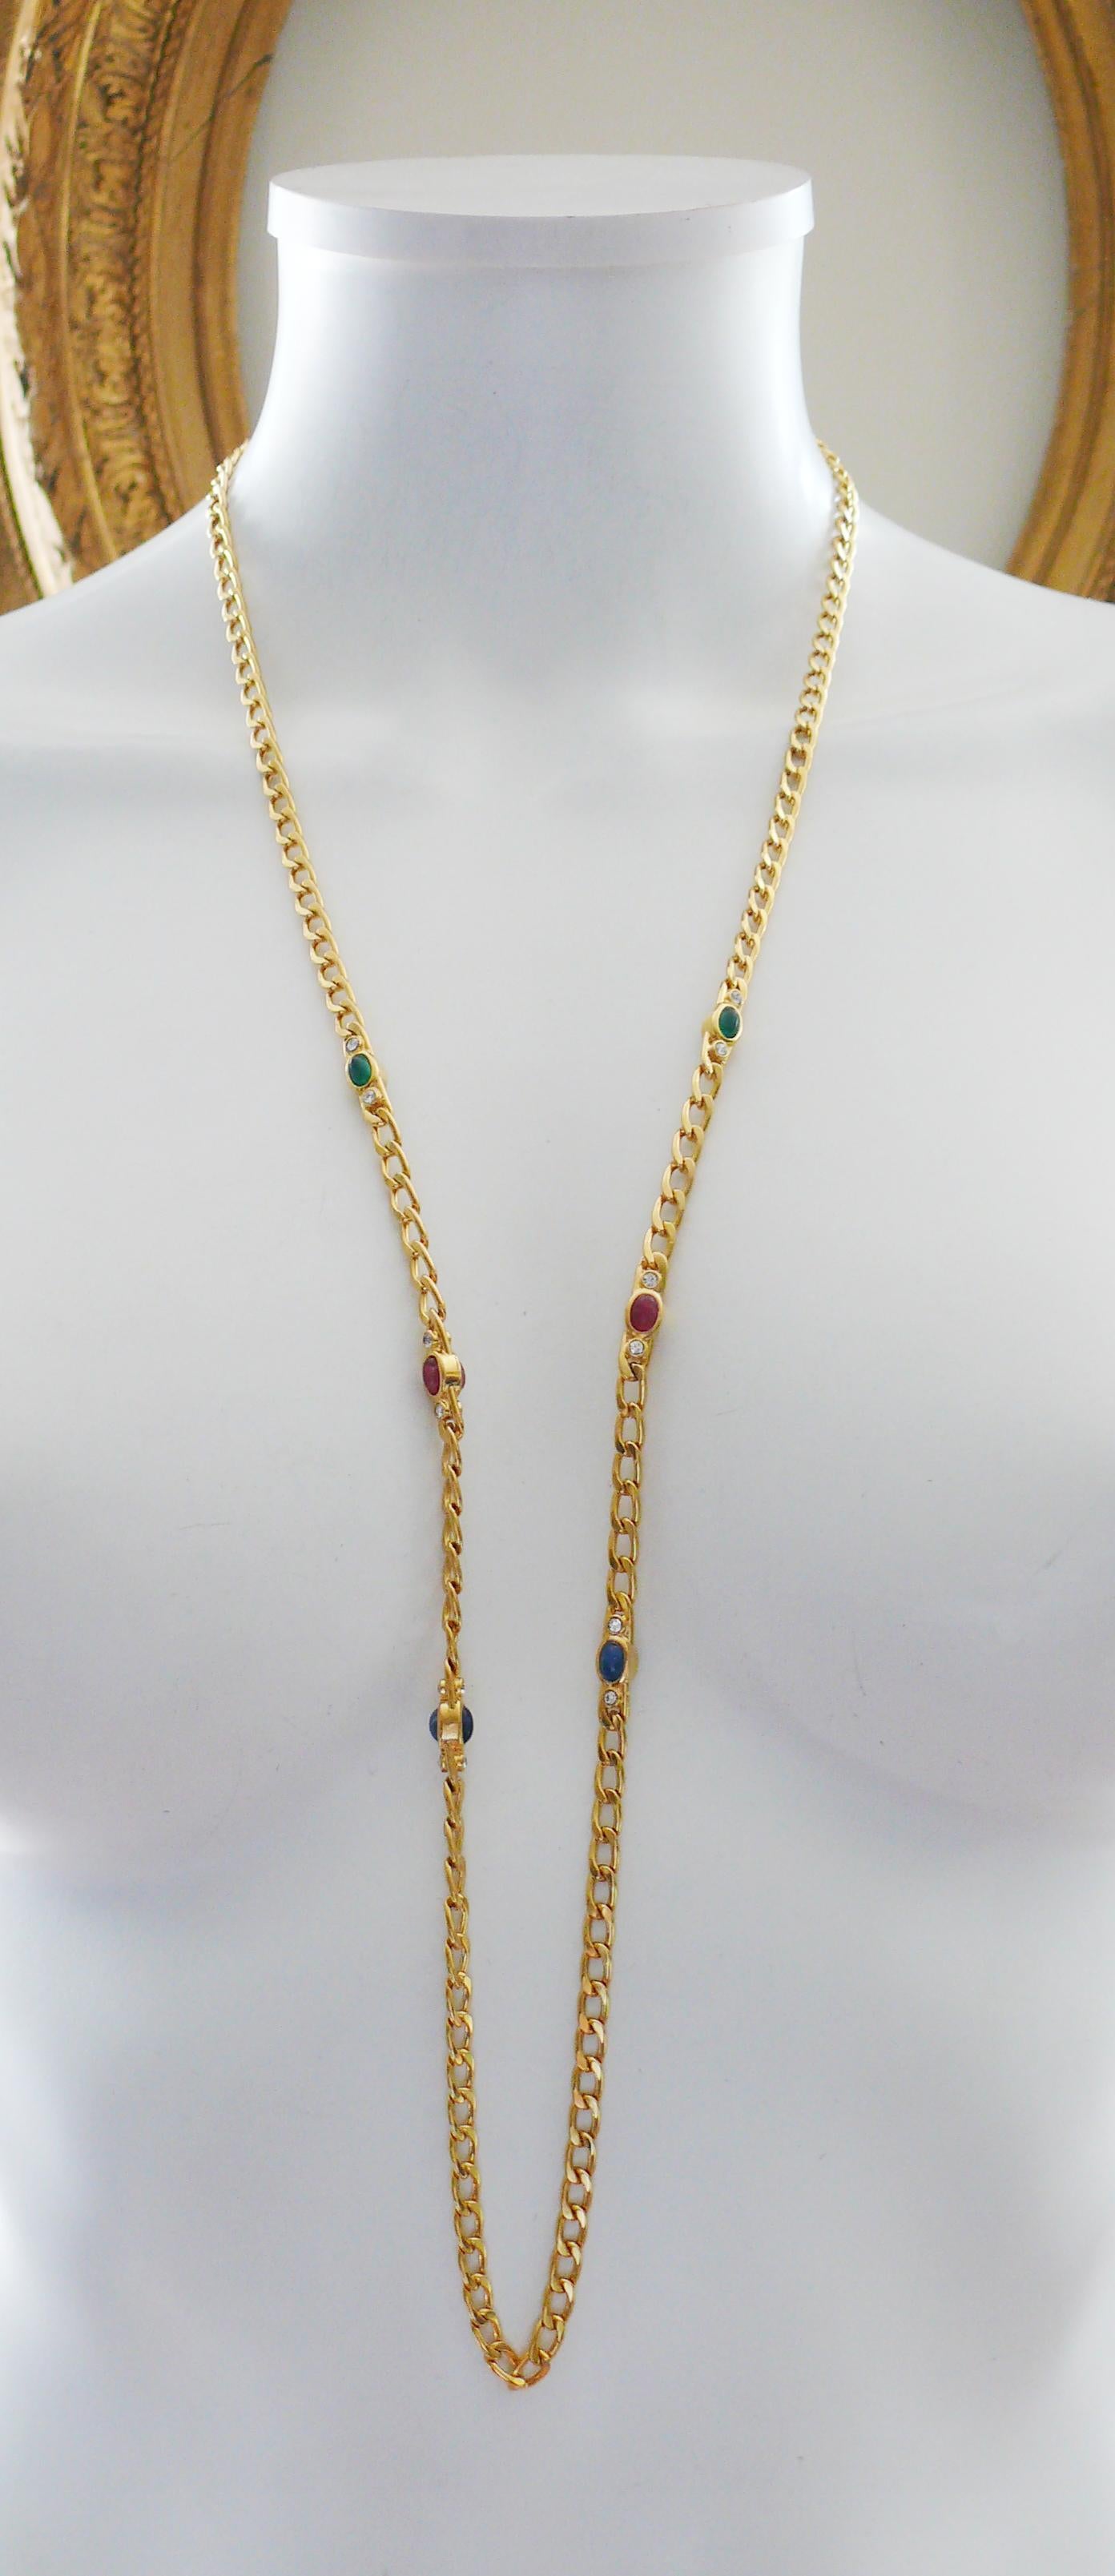 CHRISTIAN DIOR vintage gorgeous gold toned chain sautoir necklace featuring faux gem glass cabochons (sapphire, ruby, emerald) and clear crystals.

Secure clasp closure.

Embossed CHR. DIOR ©.

Indicative measurements : total length approx. 88 cm